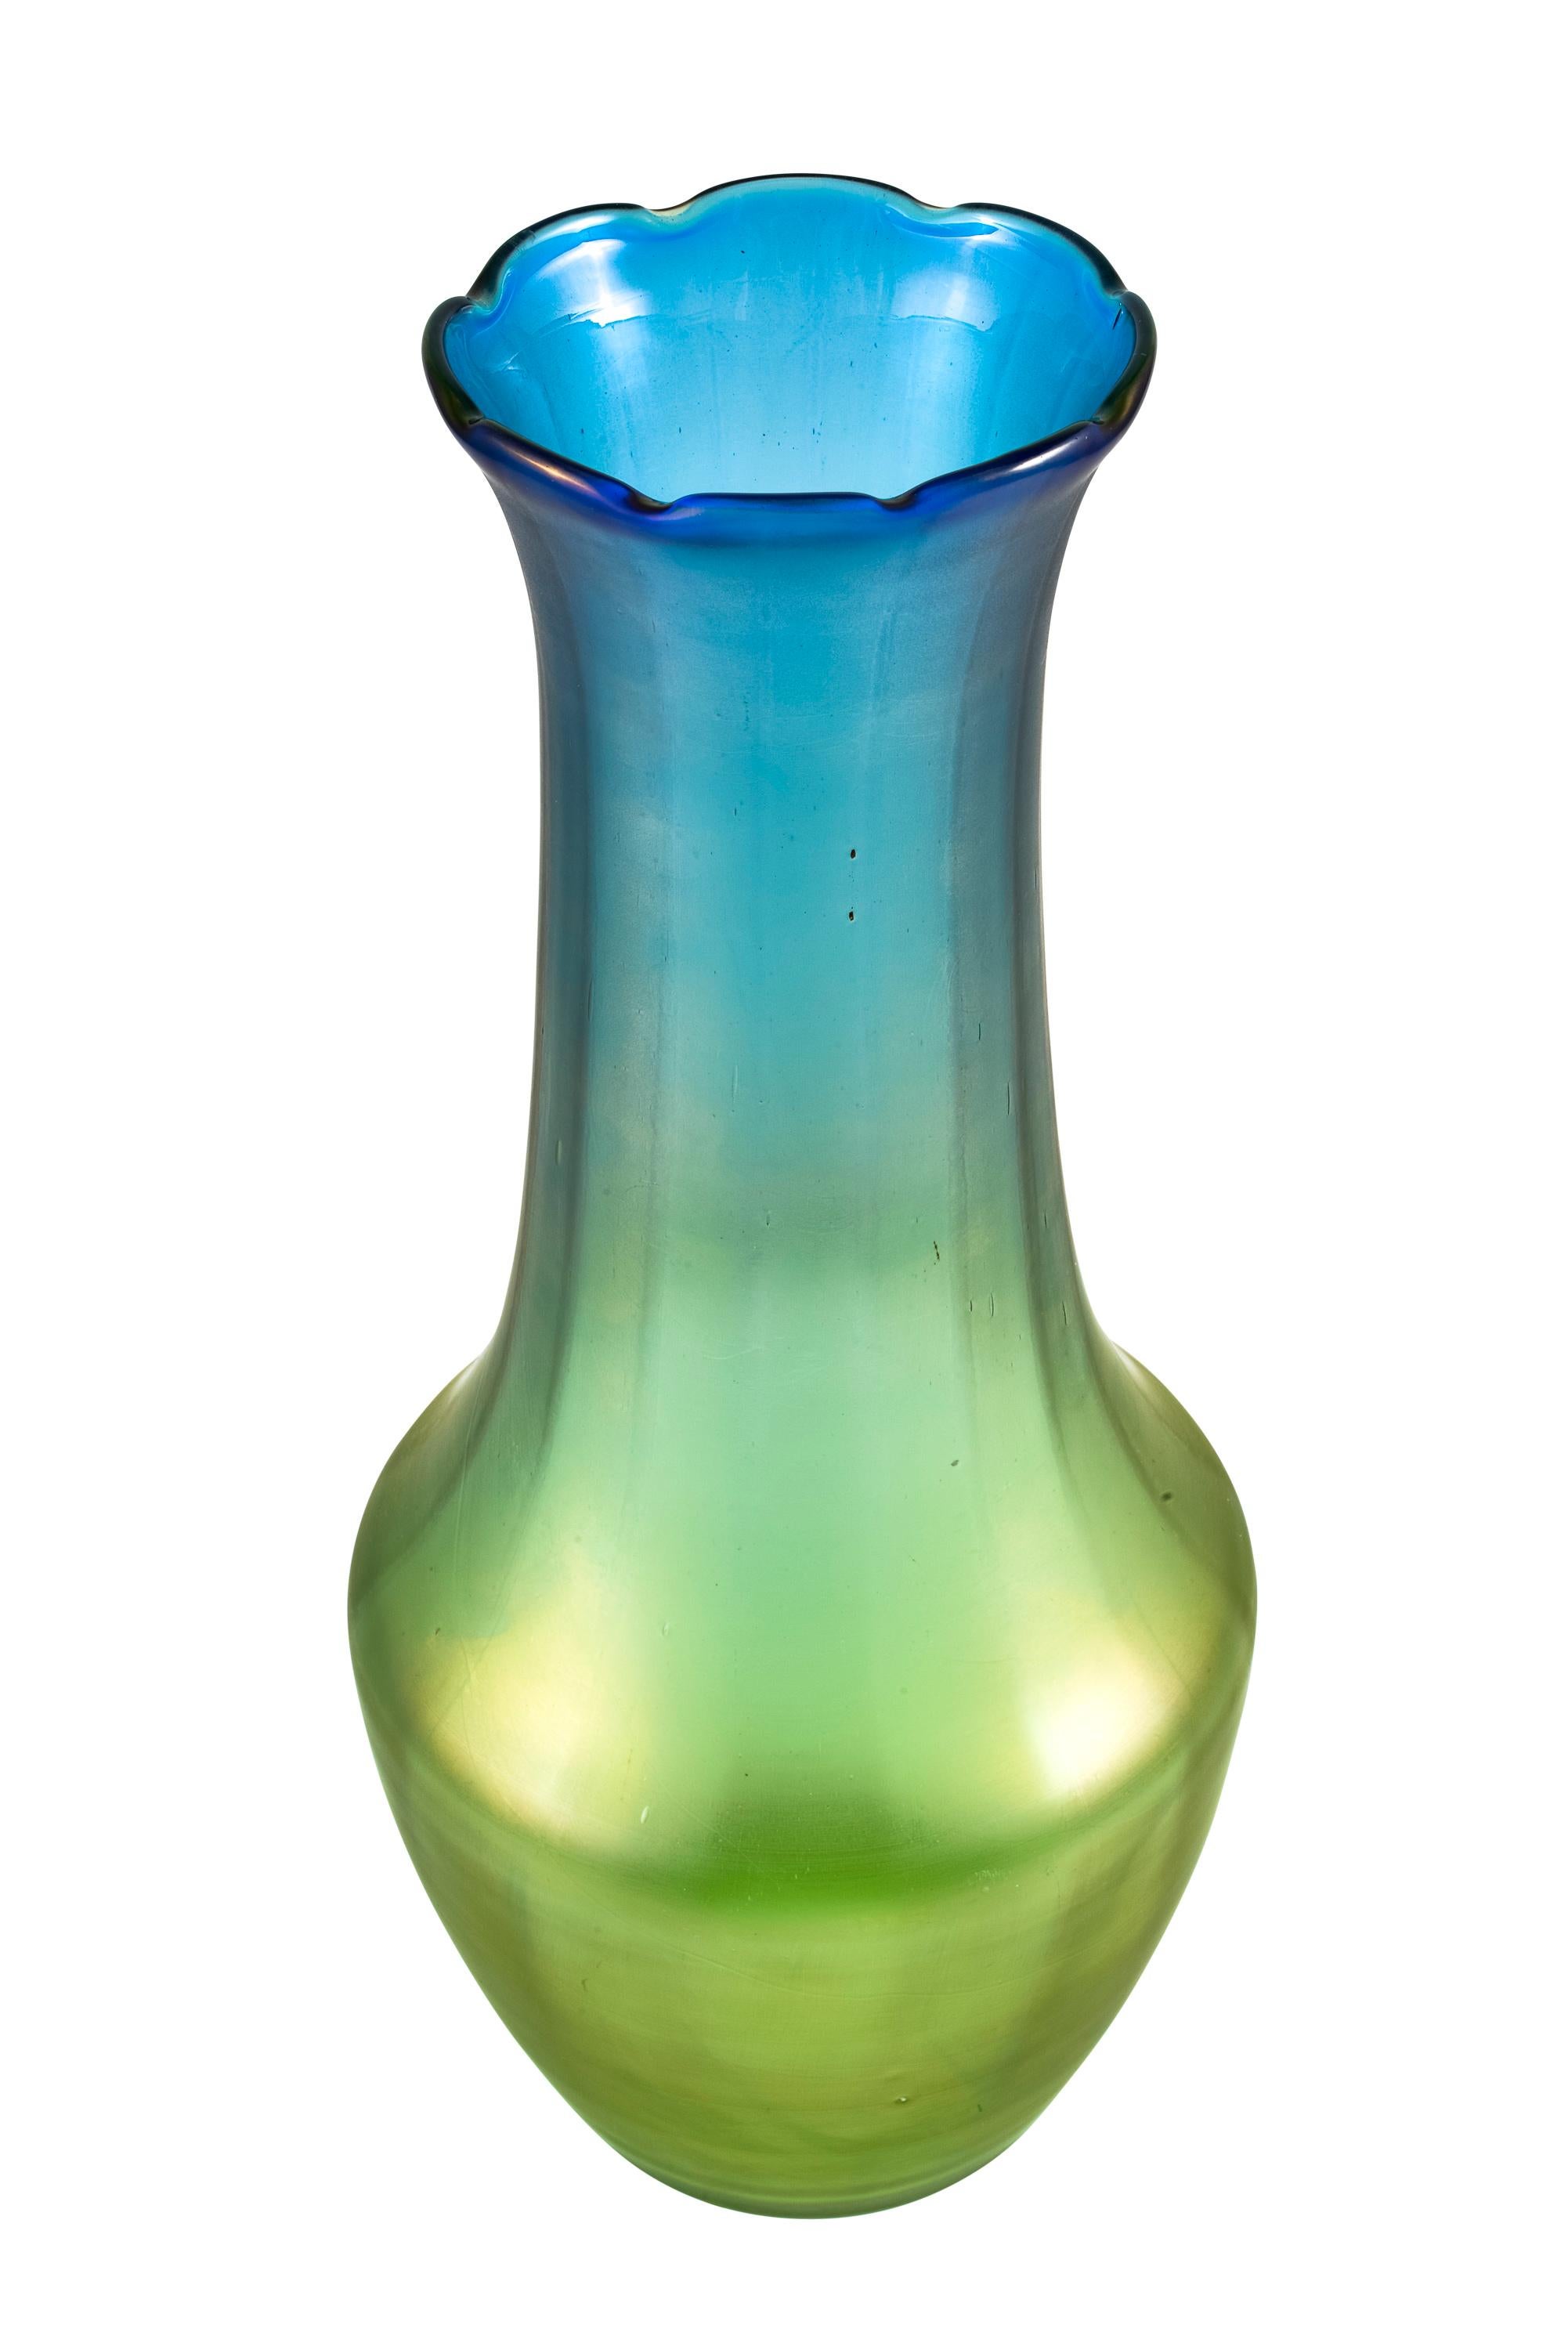 Large glass vase Austrian Jugendstil circa 1902 blue green iridescent designed by Hubert Gessner manufactured by Johann Loetz-Witwe

After his studies and work with Otto Wagner at the Academy of Fine Arts, Hubert Gessner became an influential